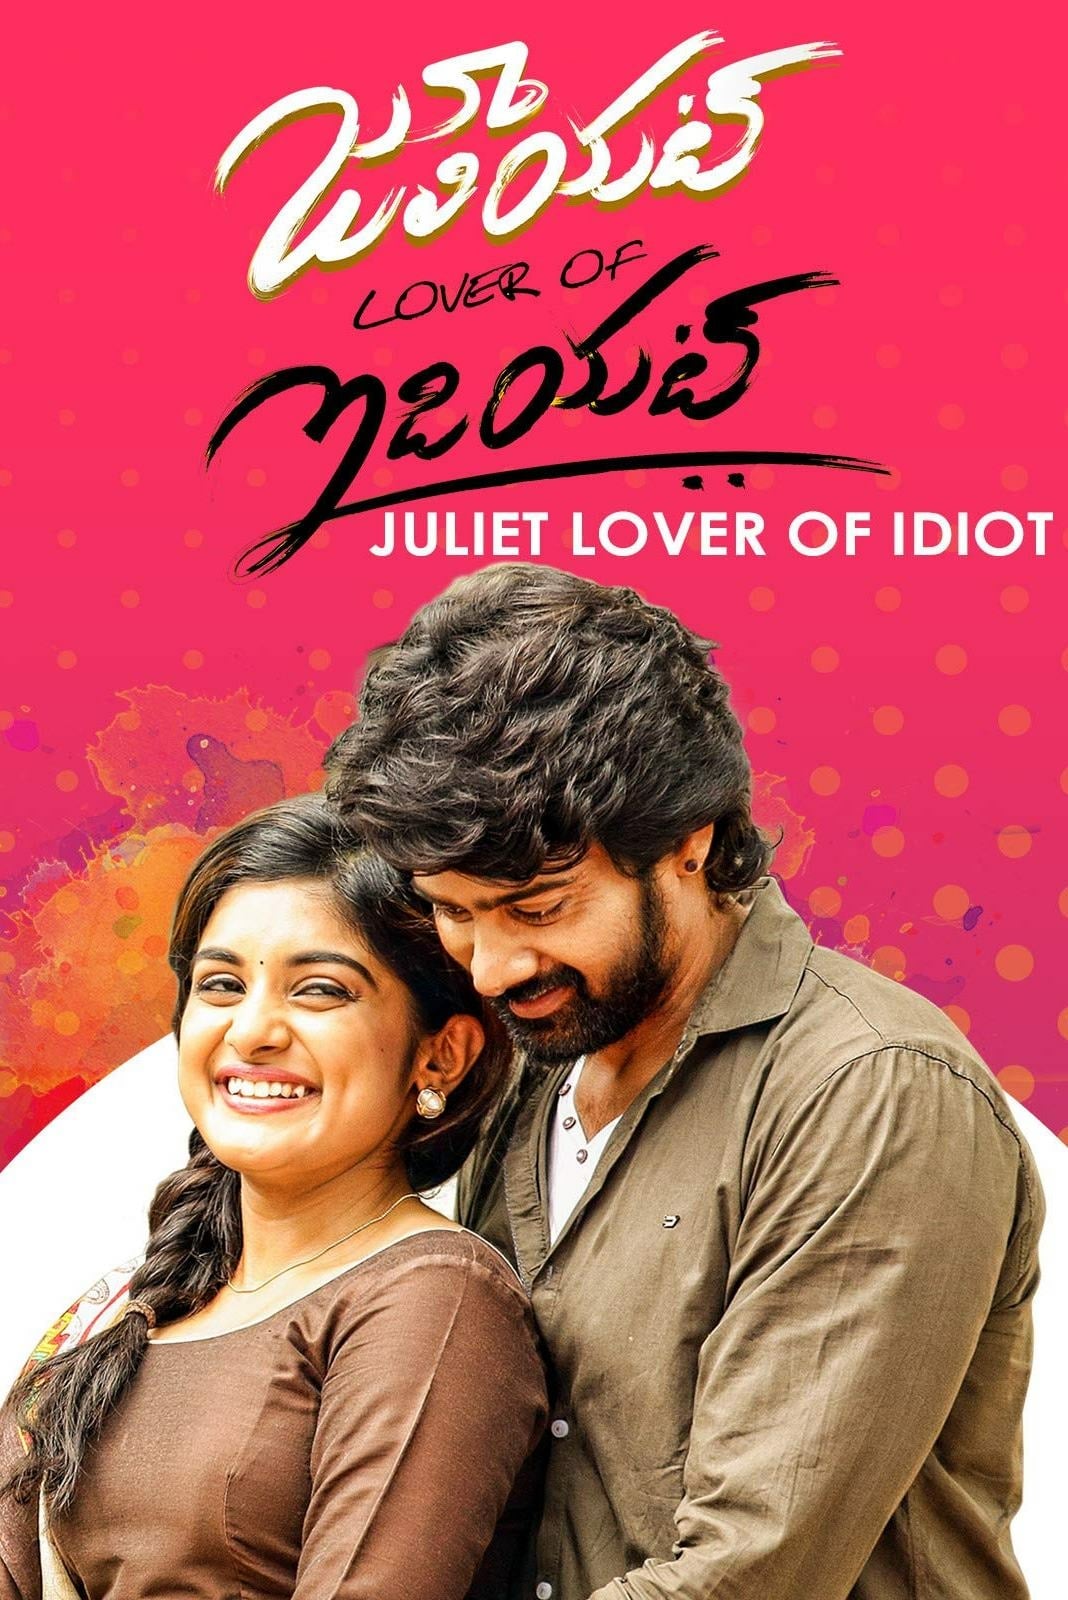 Poster for the movie "Juliet Lover of Idiot"